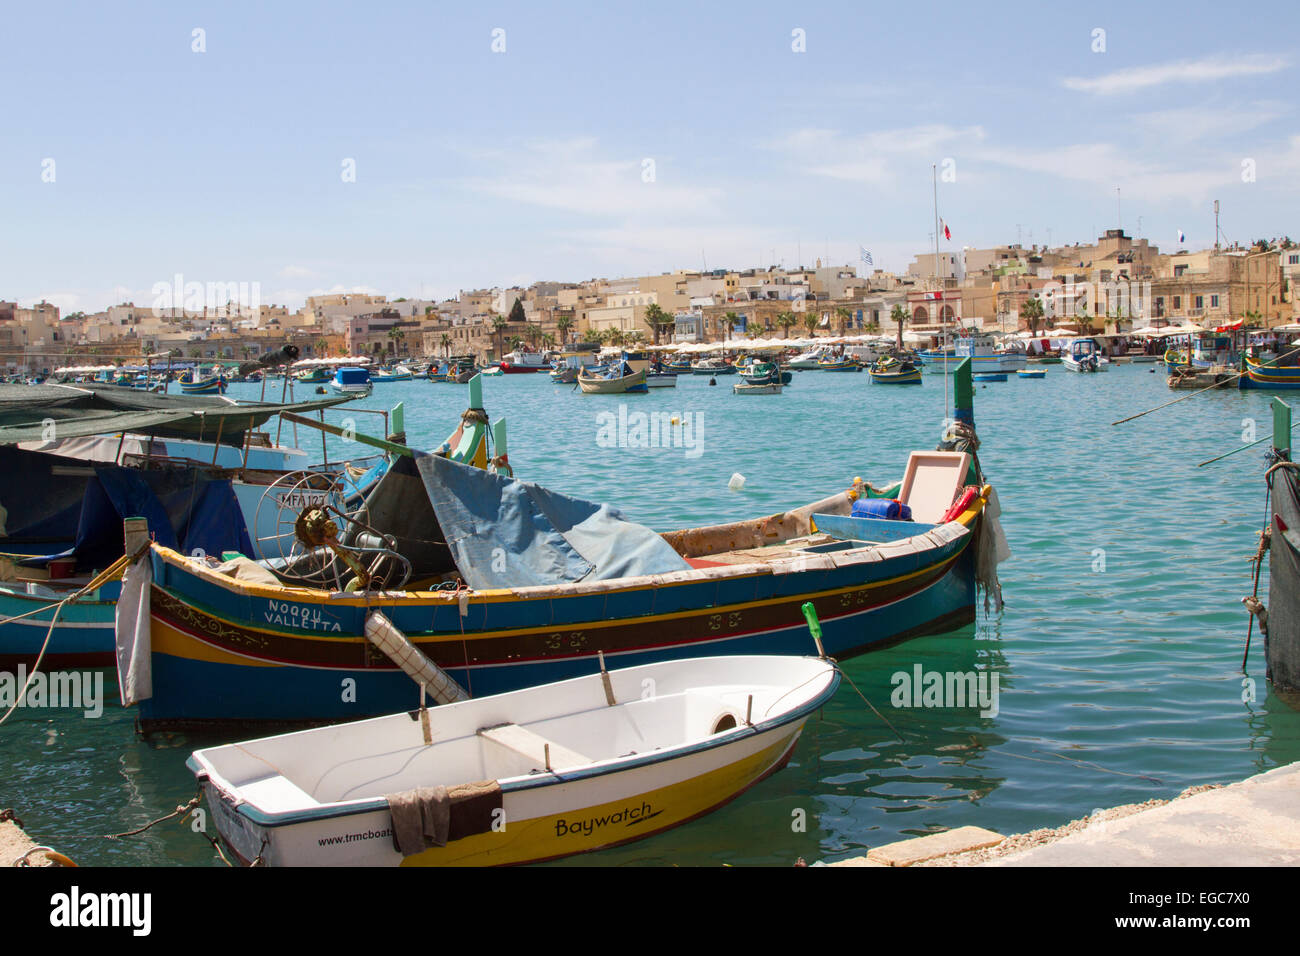 Picturesque landscape of numerous boats both traditional and modern in Marsaxlokk harbour, Malta Stock Photo